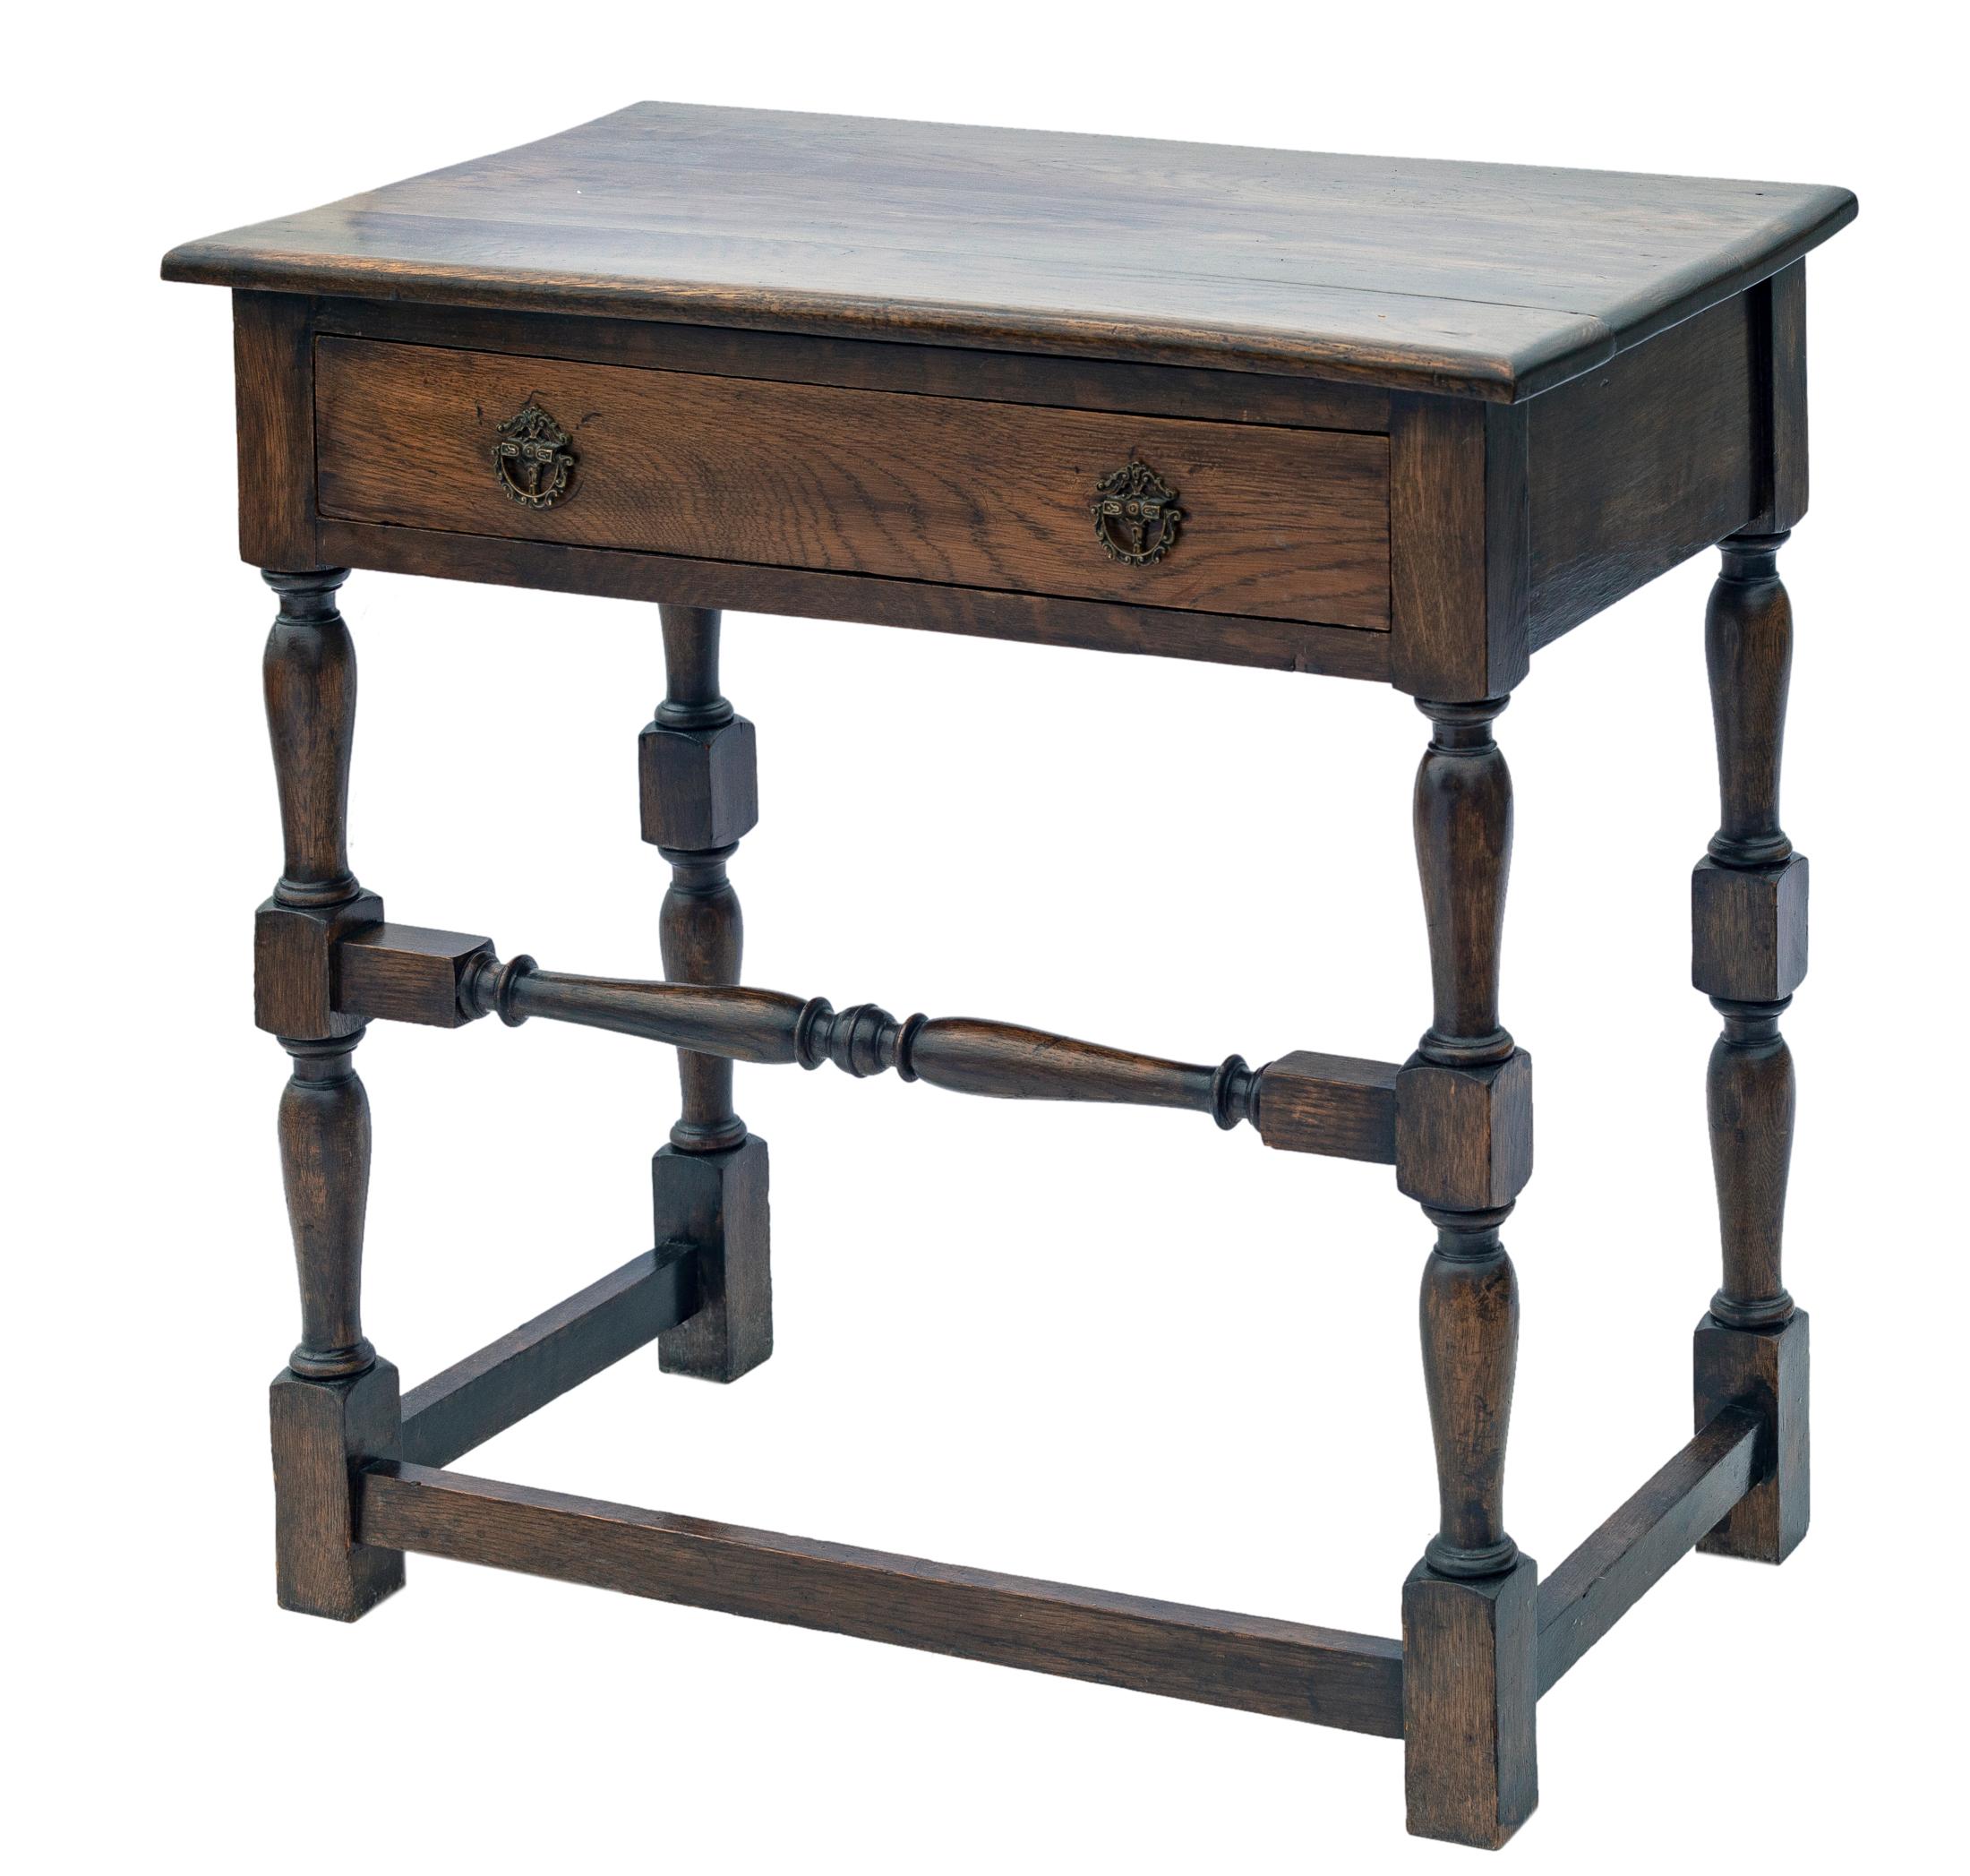 In oak, an antique English entry table.
Add character to any room with this beautiful table supported by turned legs in Oak with a spacious single dovetailed drawer with 2 ornate brass pulls. 